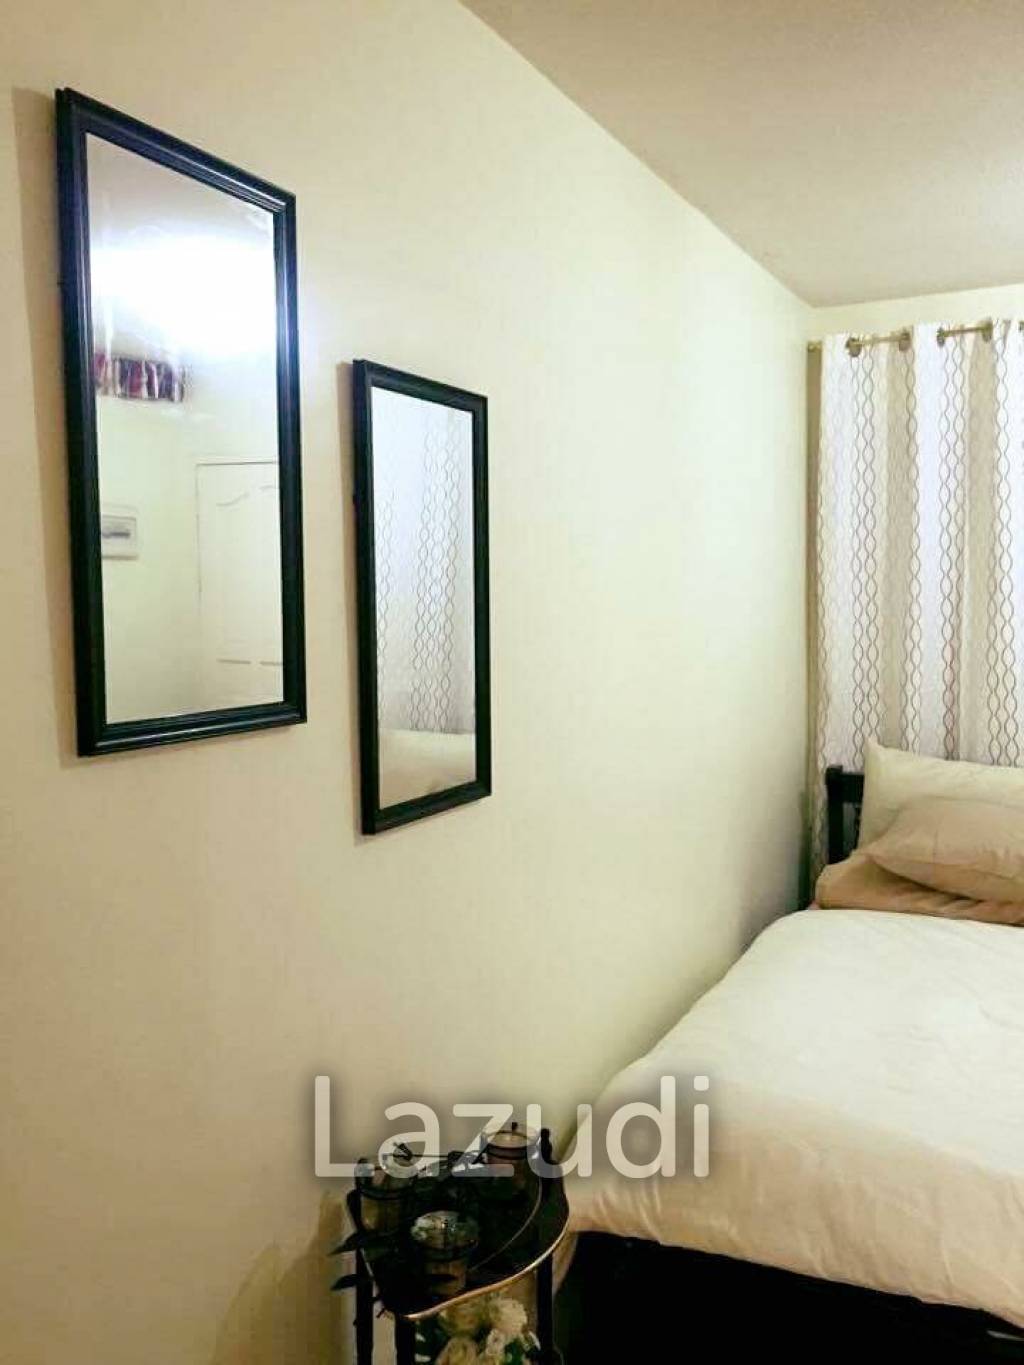 FOR SALE: STUDIO CONDOMINIUM at CAPRIS OASIS PASIG CITY - CAN BE OCCUPIED TODAY